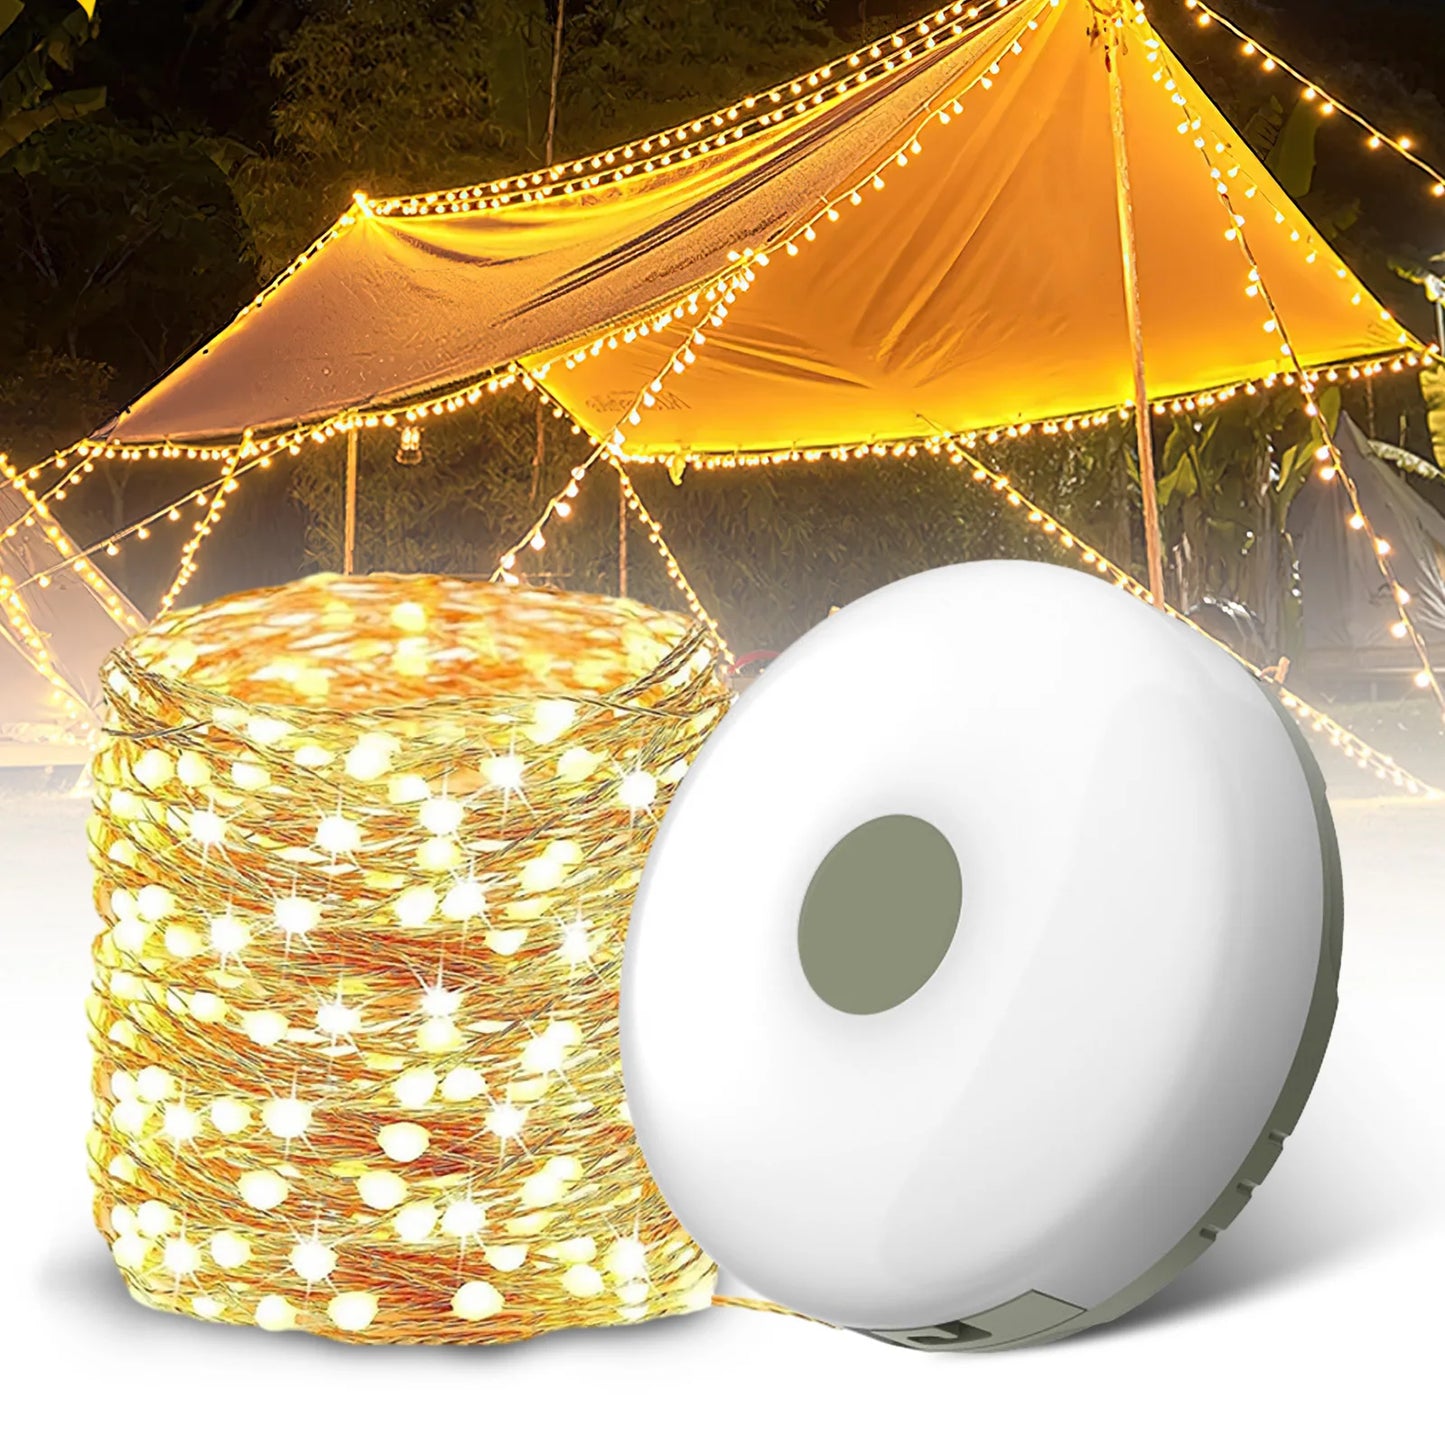 USB Rechargeable Camping Atmosphere Outdoor Tent Light.  Colorful LED Flashlight with Magnet Hook 10 Meter Light Strip